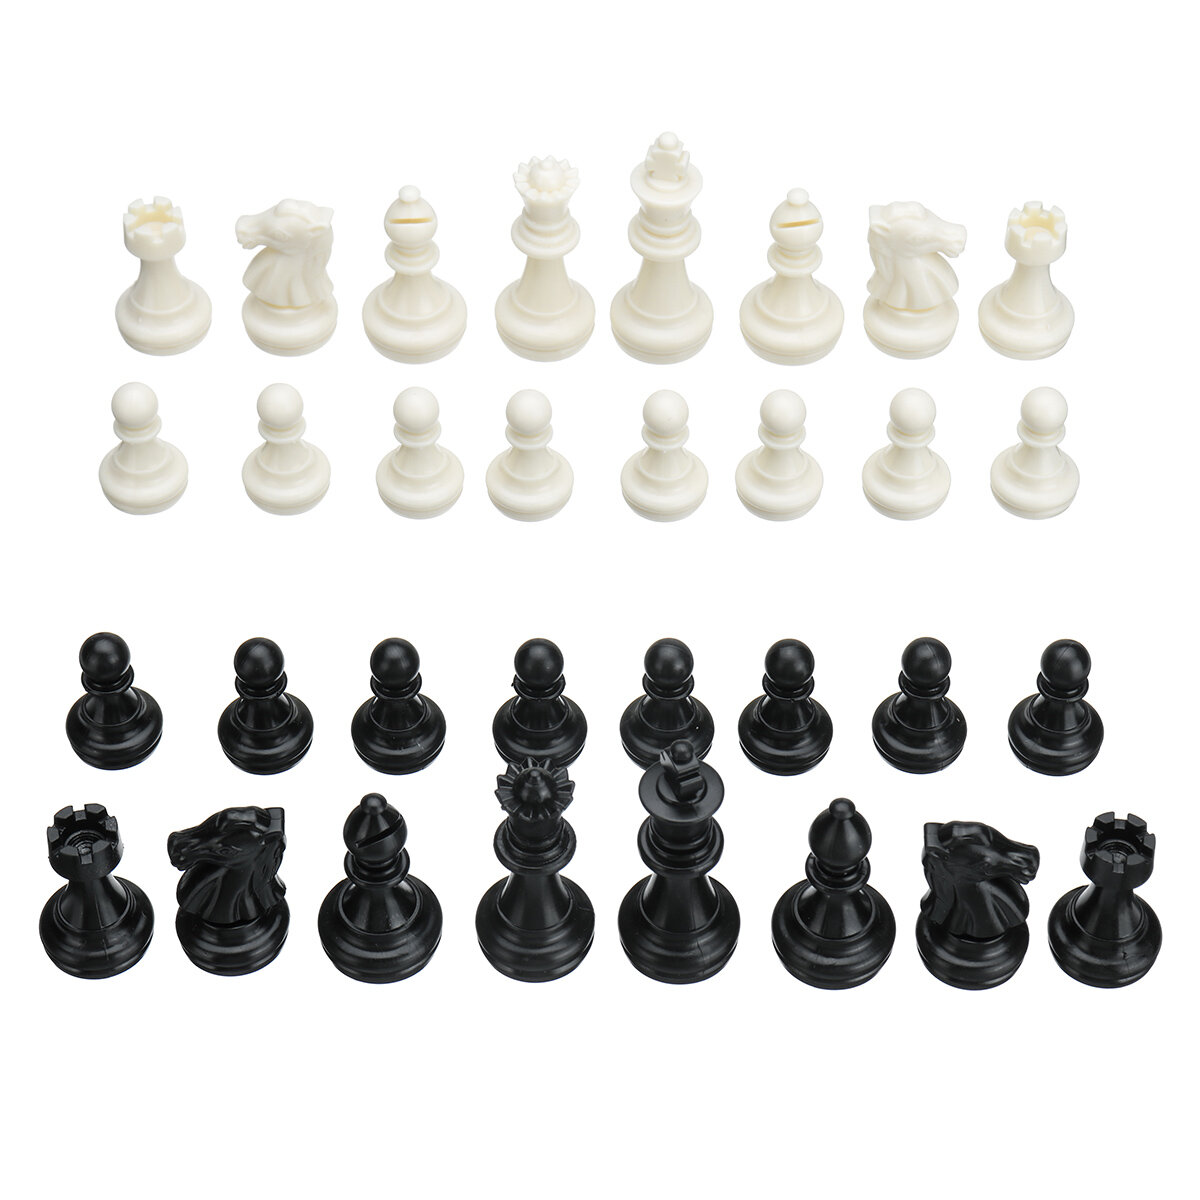 32pcs Plastic Game Chess International CheckerboardEntertainment Adult Kids Gift Family Travel Board Game